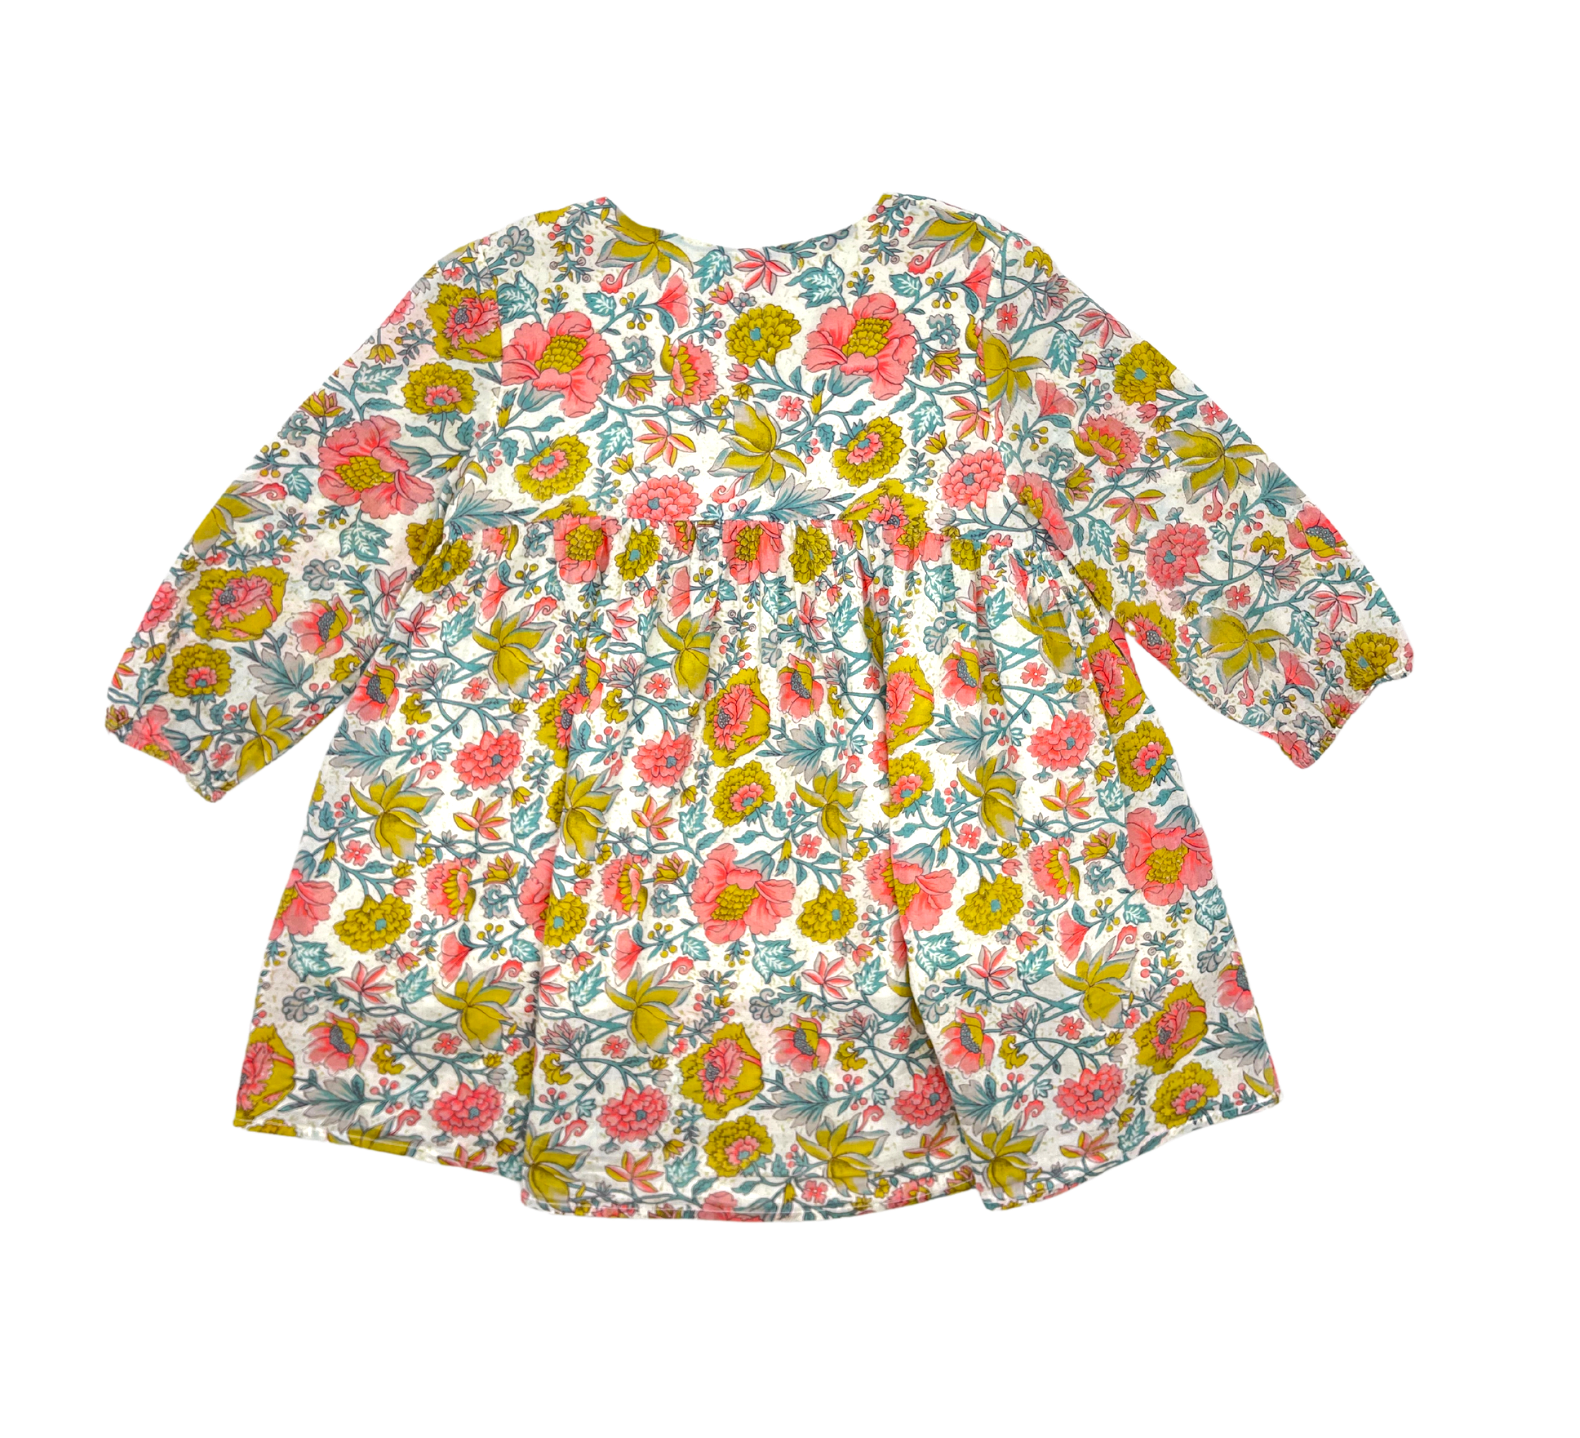 LOUISE MISHA - Floral dress with pompoms - 3 years old